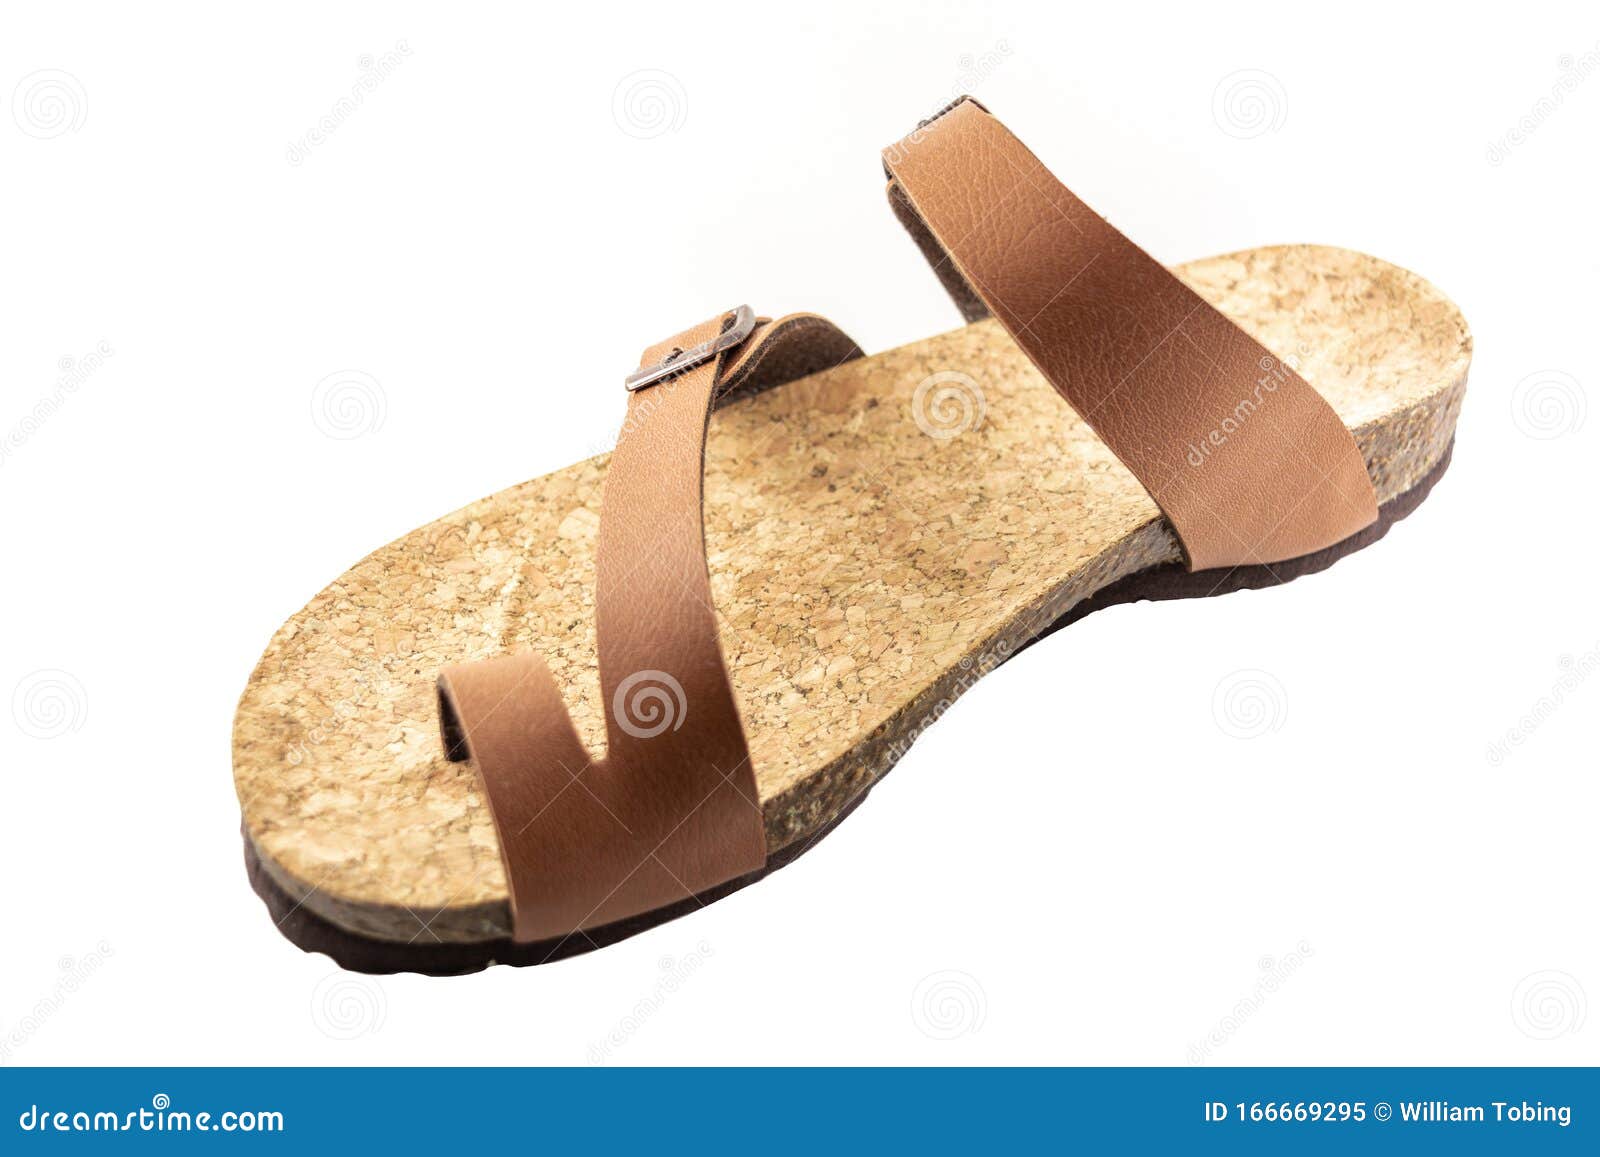 Sandal, Open Type Of Footwear Isolated White Background Stock Image ...